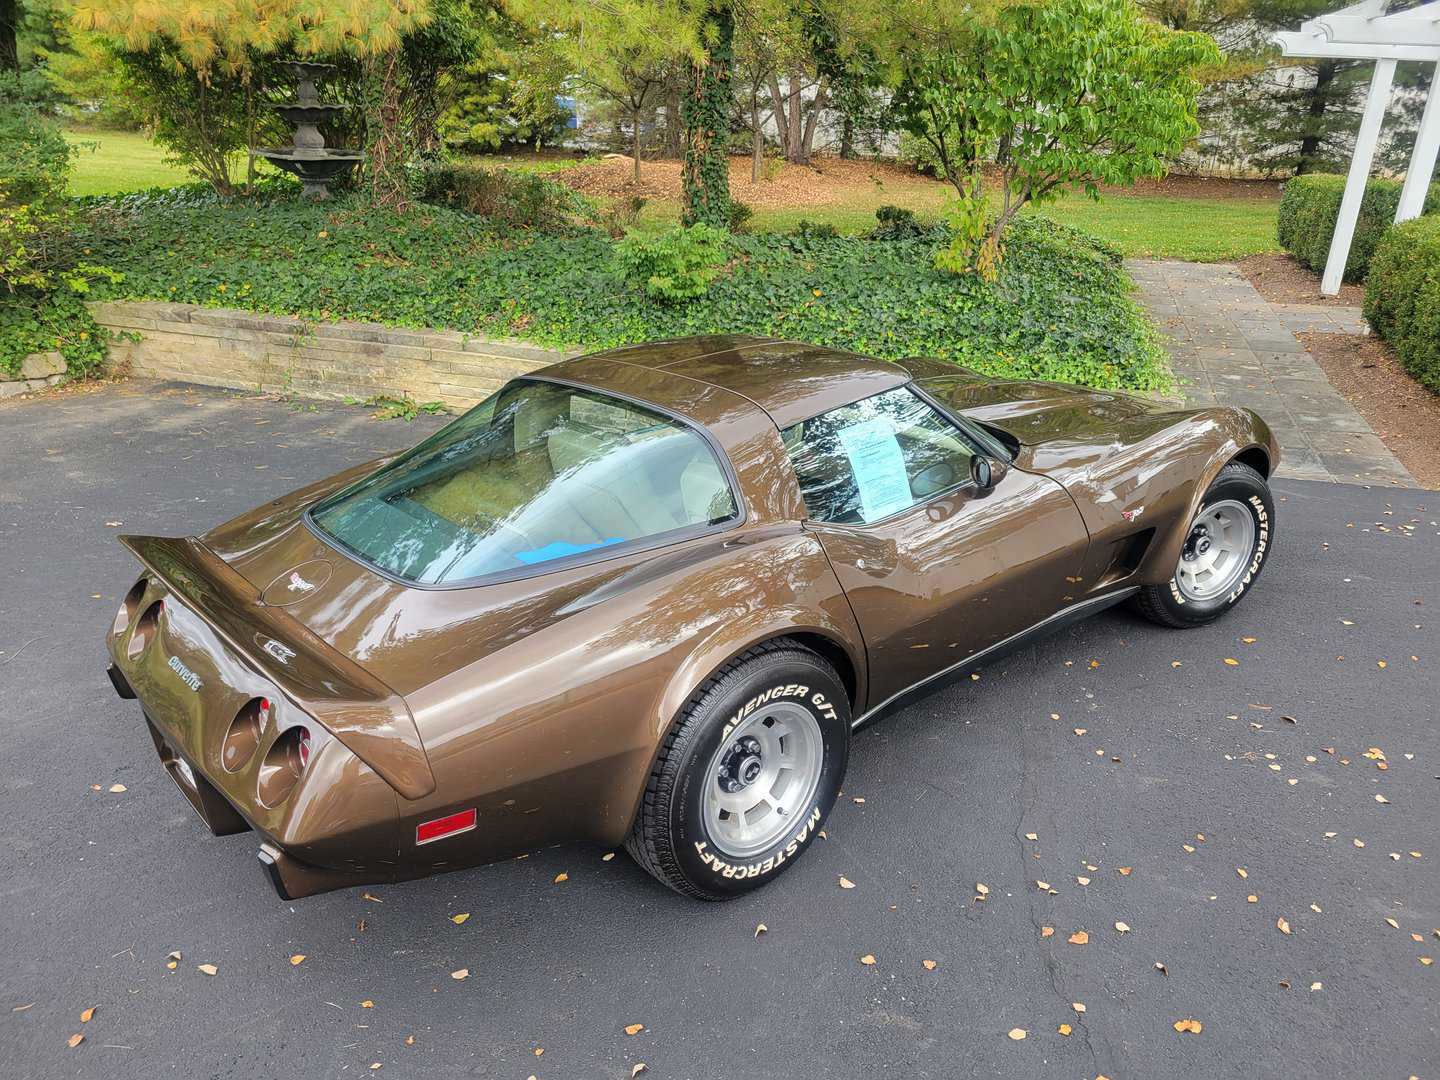 A brown 1979 Chevrolet Corvette parked in front of a house.